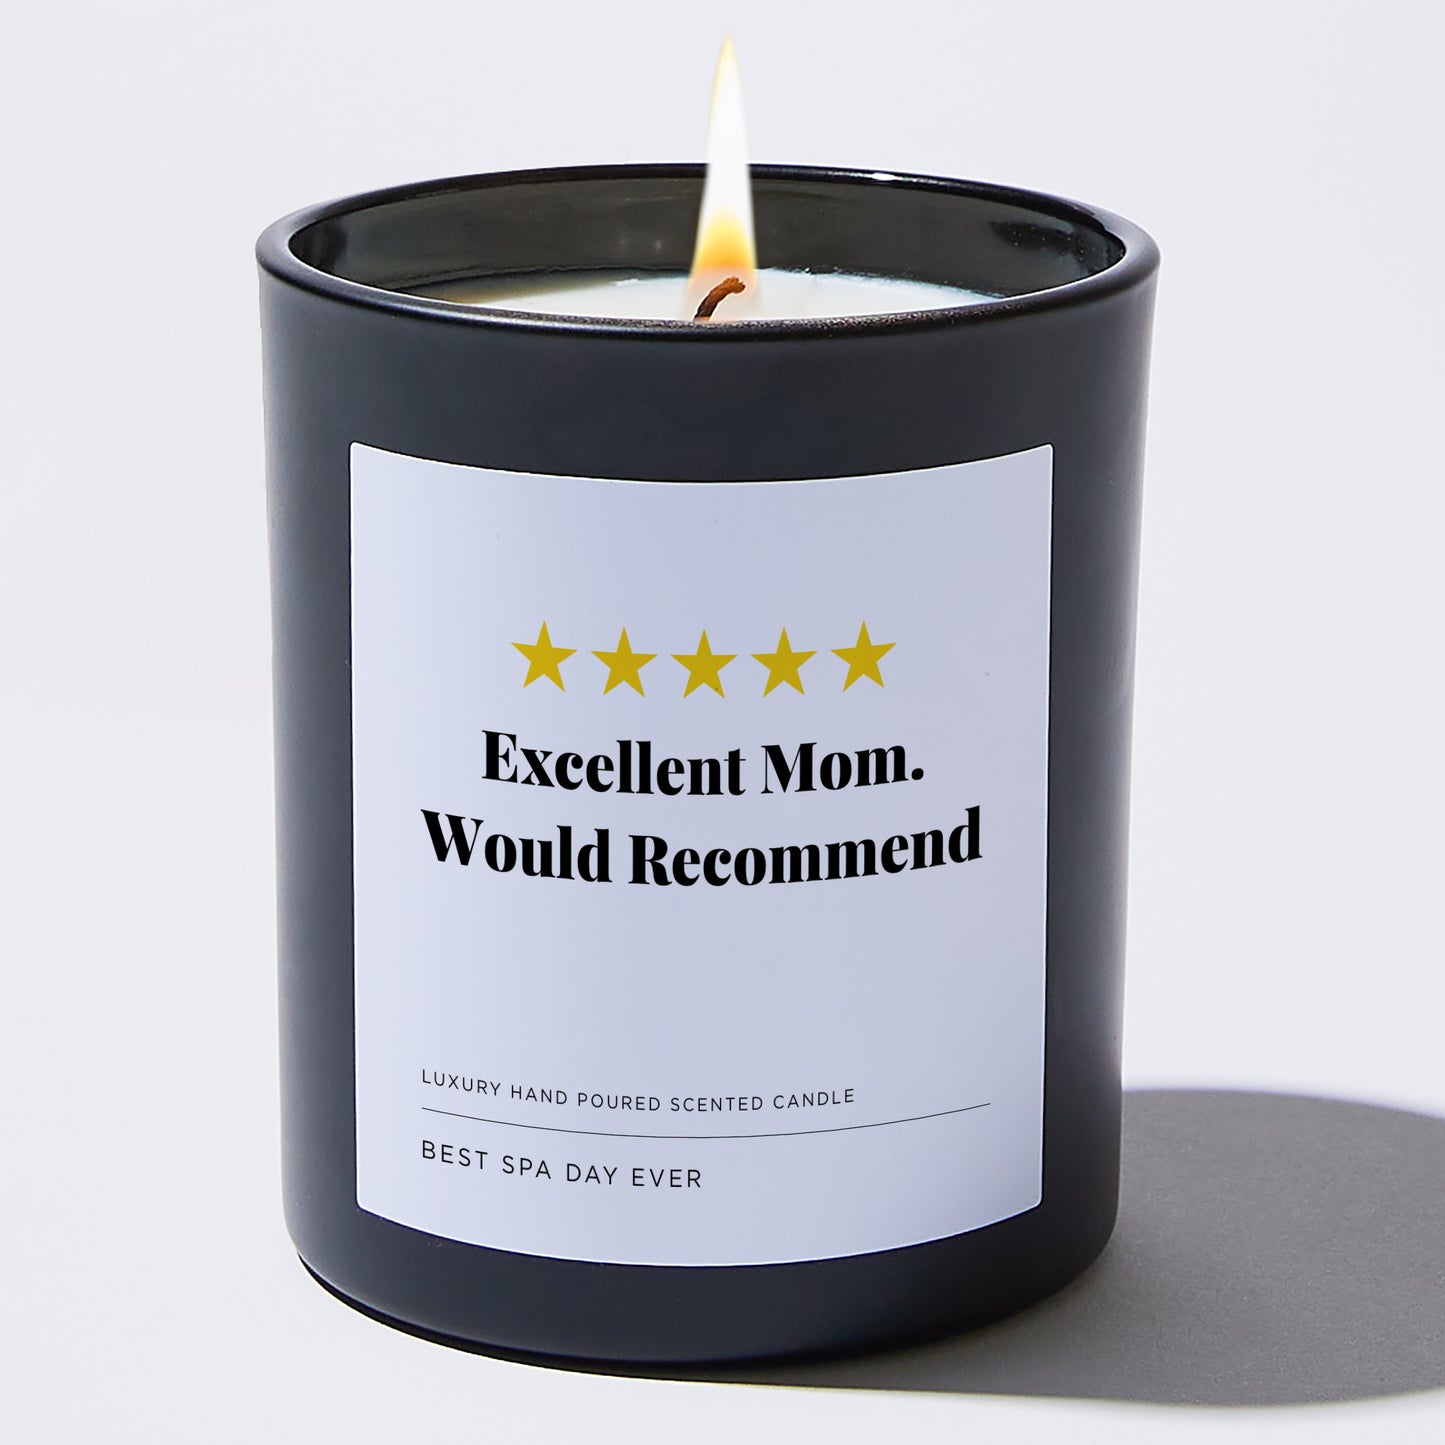 Gift for Mom - ⭐⭐⭐⭐⭐ excellent mom. would recommend - Candle